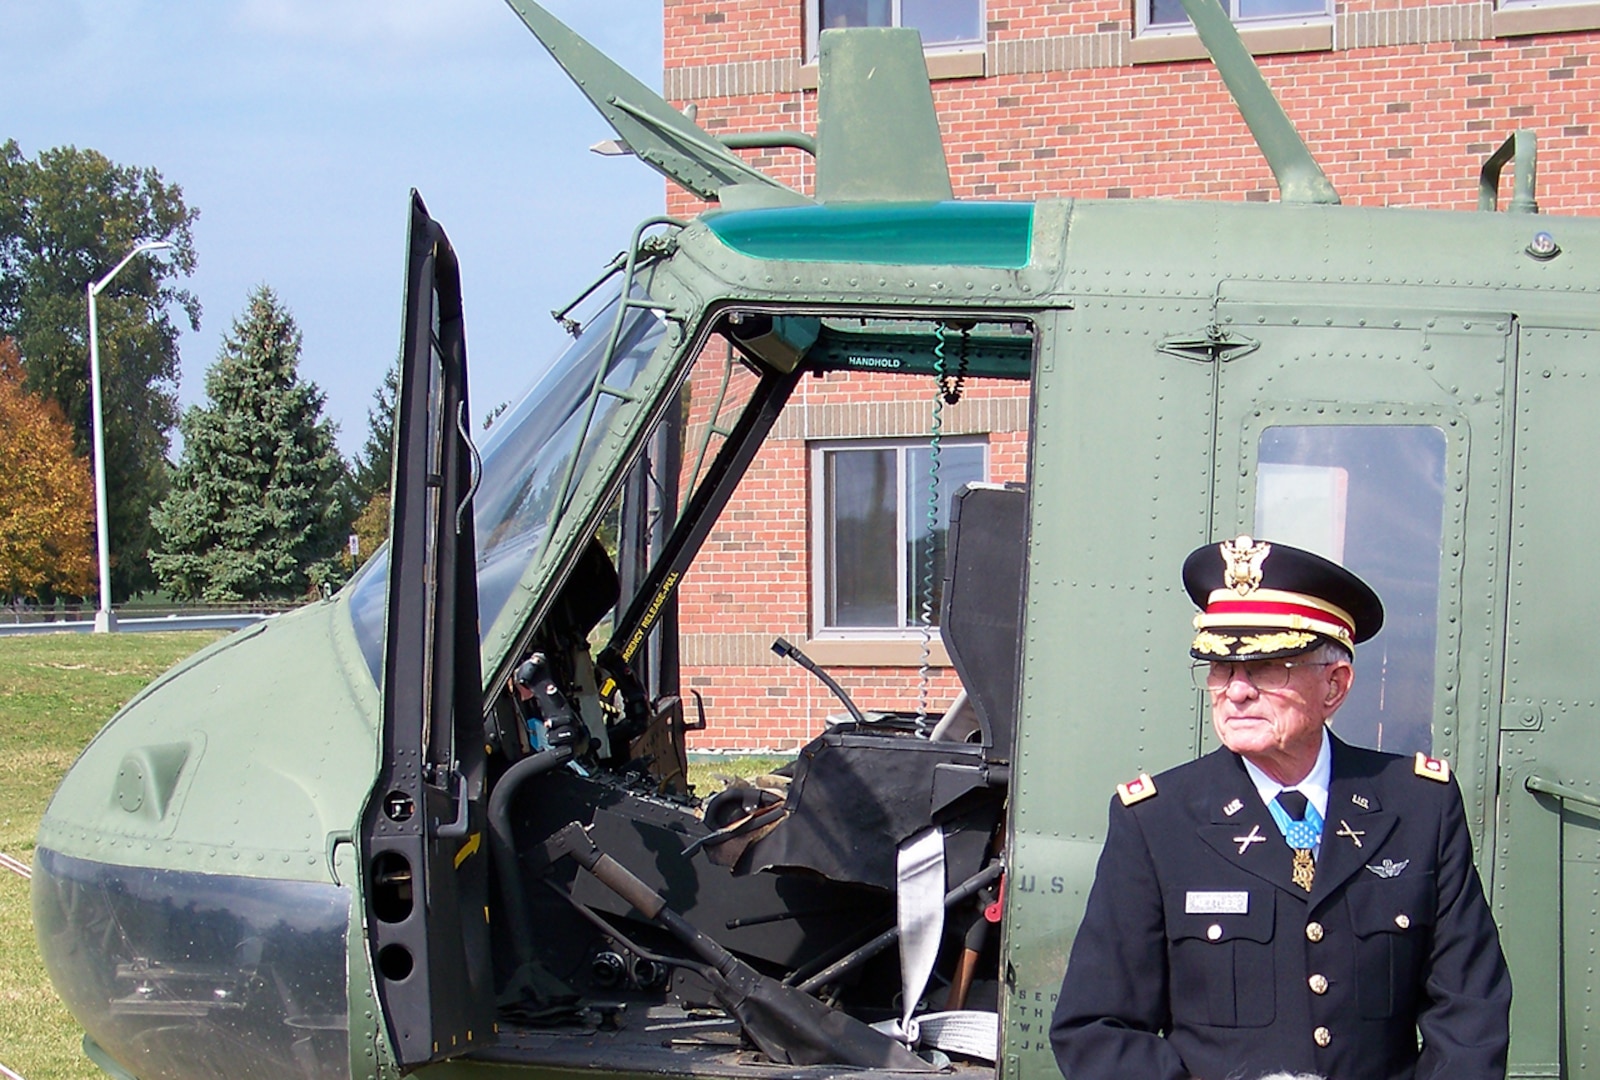 Army Lt. Col. Charles Kettles (Ret.) stands in front of a Vietnam-era helicopter on display at Defense Supply Center Columbus. Kettles was awarded the Medal of Honor July 18 for actions he performed as a pilot in Vietnam in a similar model aircraft. 